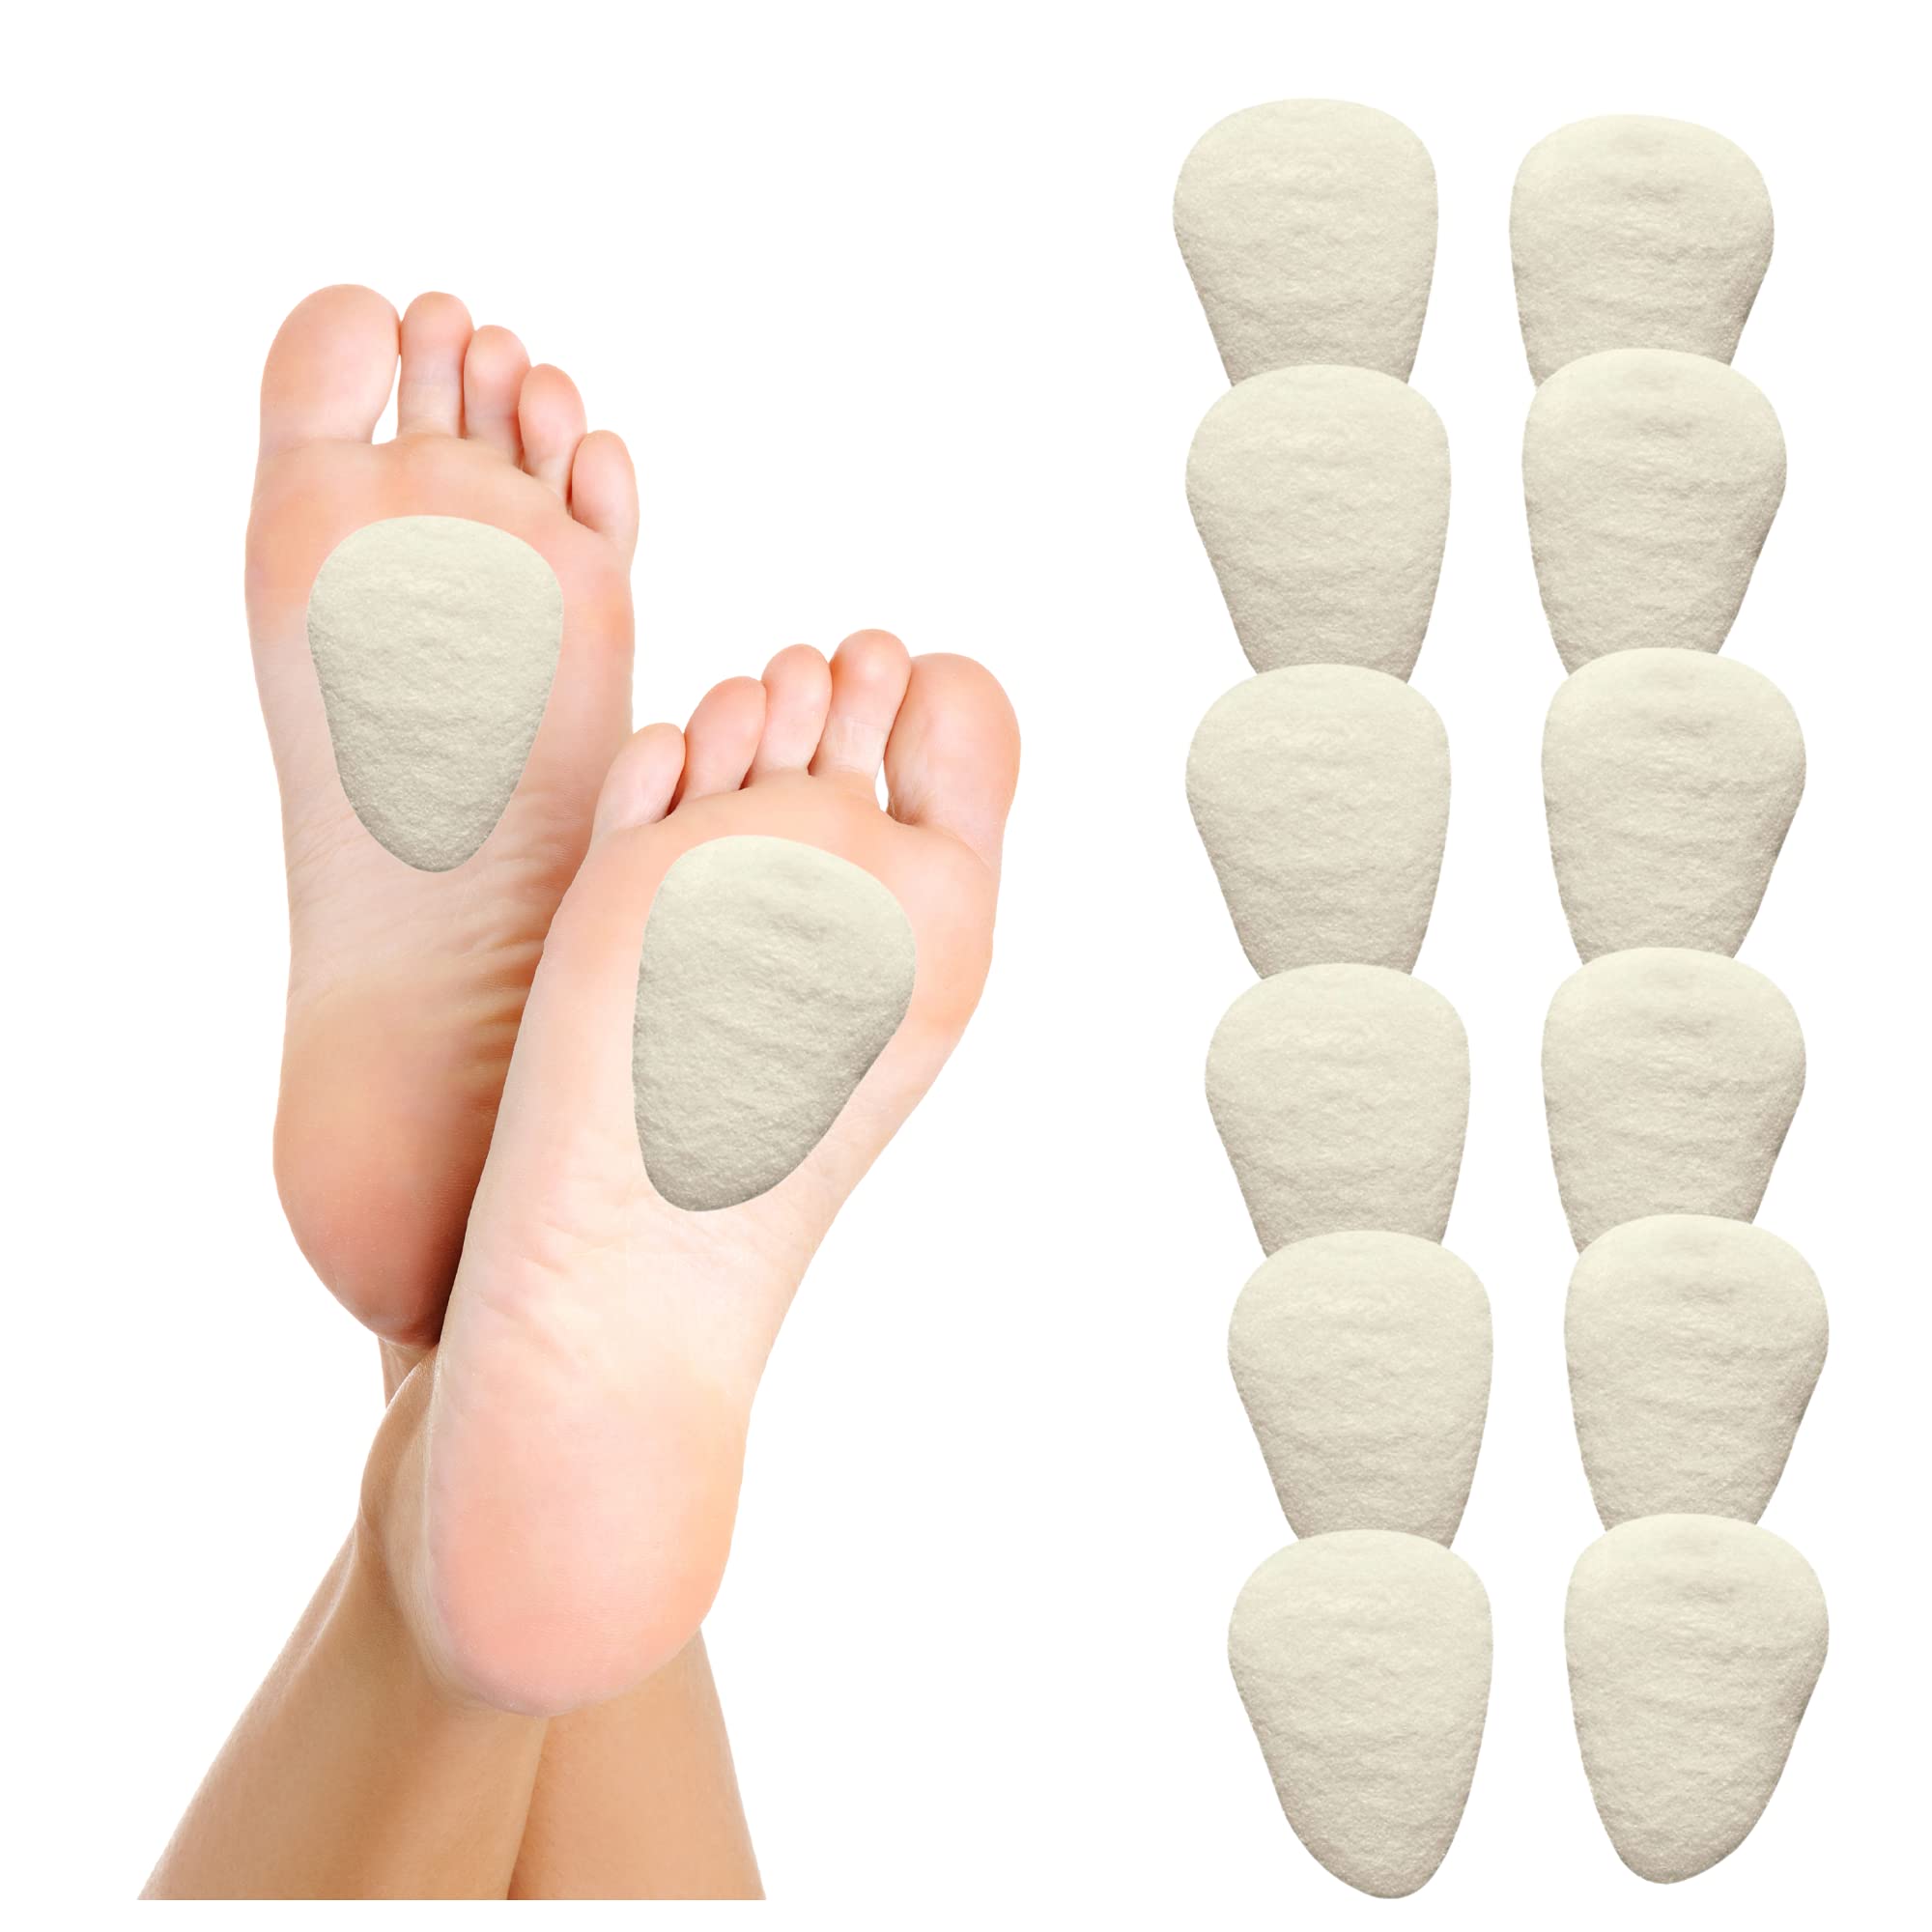 <p>- it provides support to the arches</p><p>- reduces the pressure on the ball of the foot, and sometimes on the arches</p>